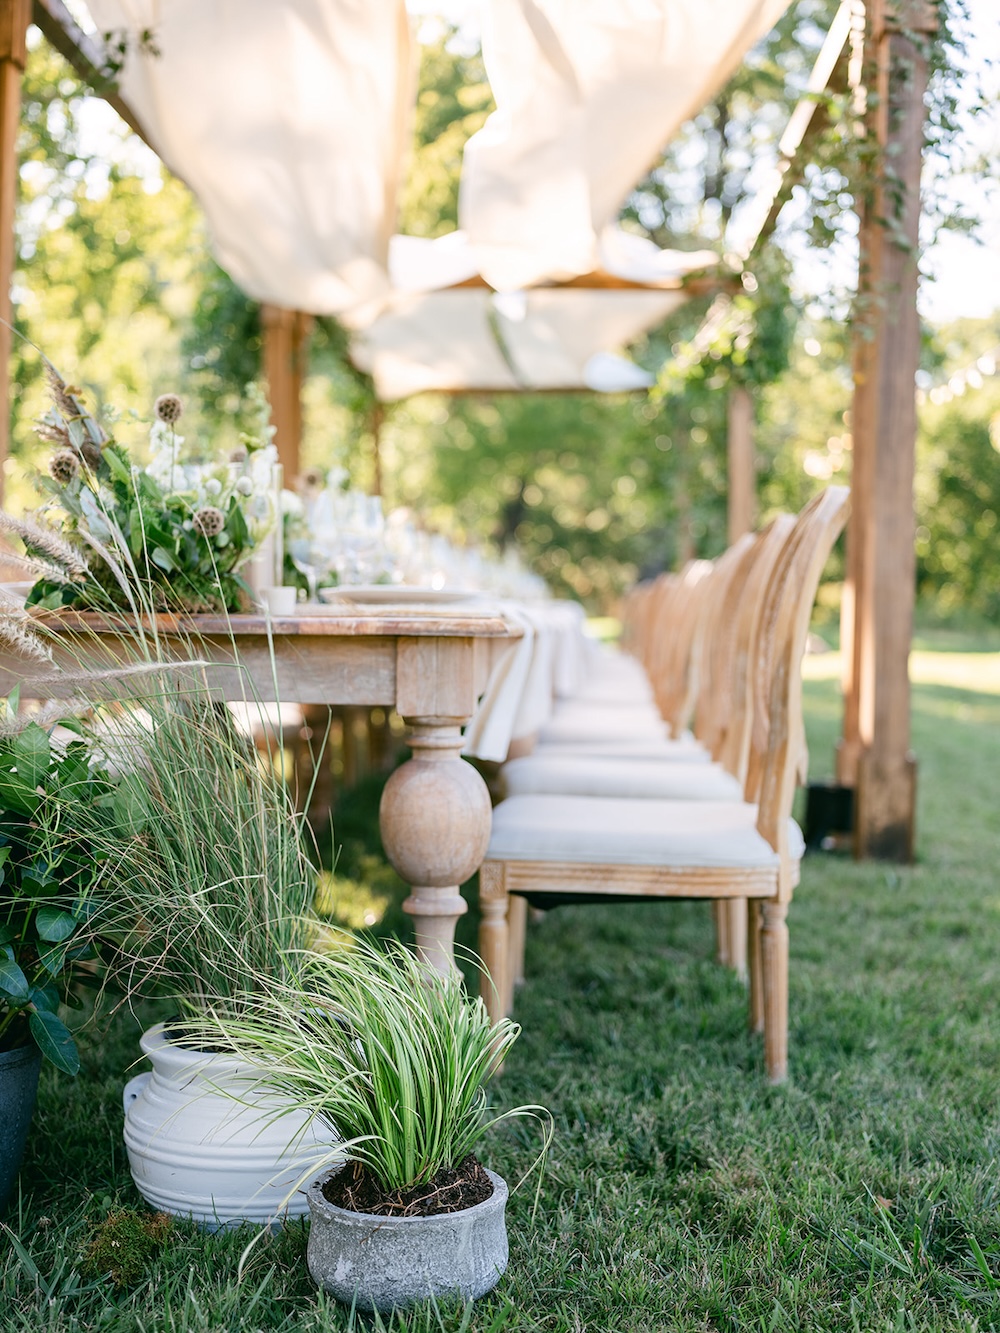 Potted plants party decor. Farmhouse style dinner tables, rattan chairs. Milestone birthday party celebration weekend in Middleburg, Virginia. Sarah Bradshaw Photography.